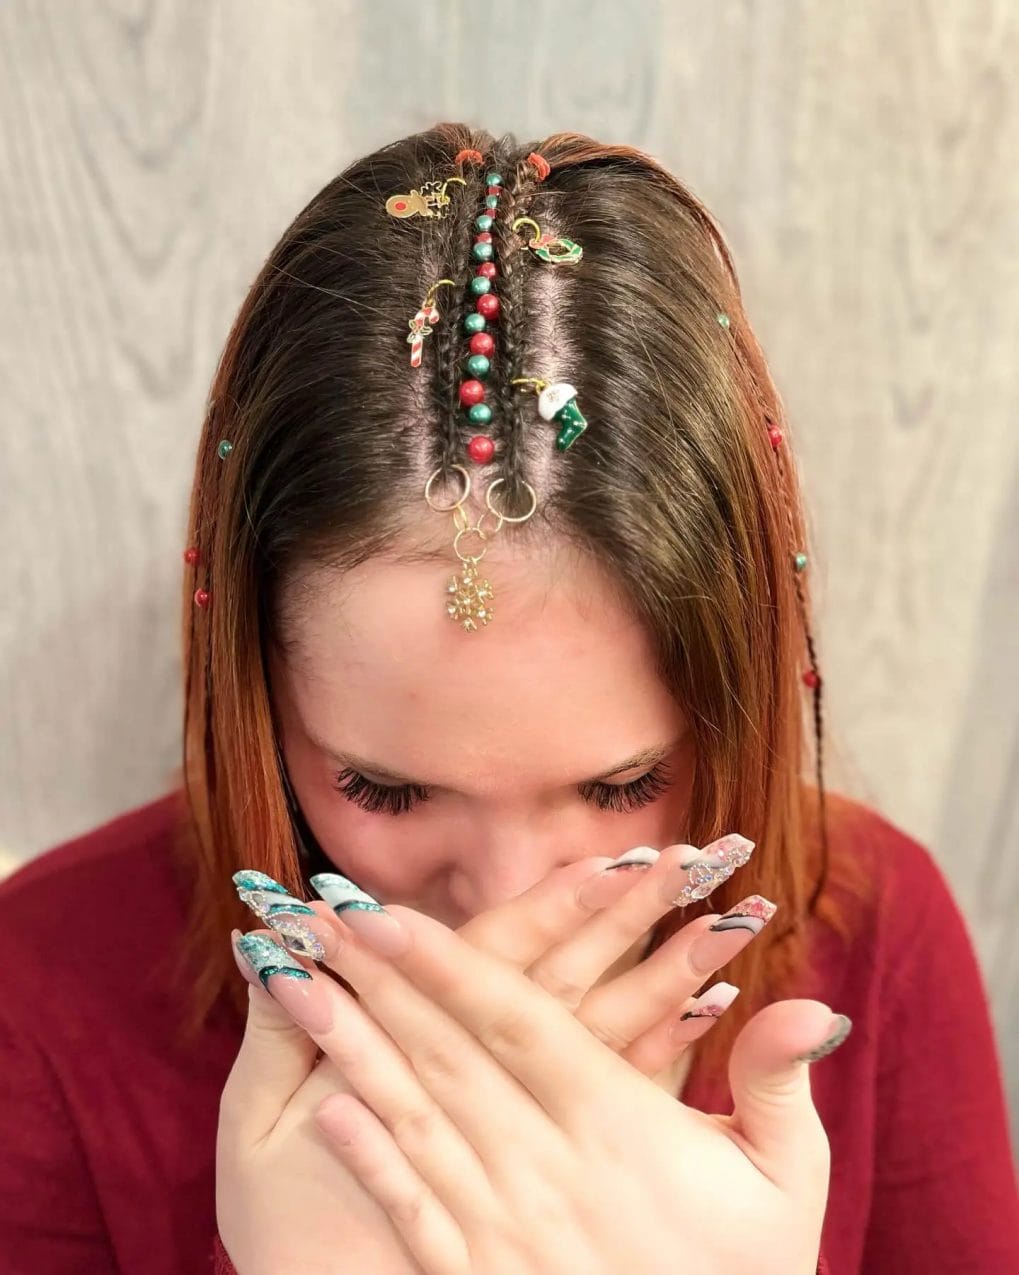 Warm auburn straight cut with tiny braids decorated with vibrant beads and charms.